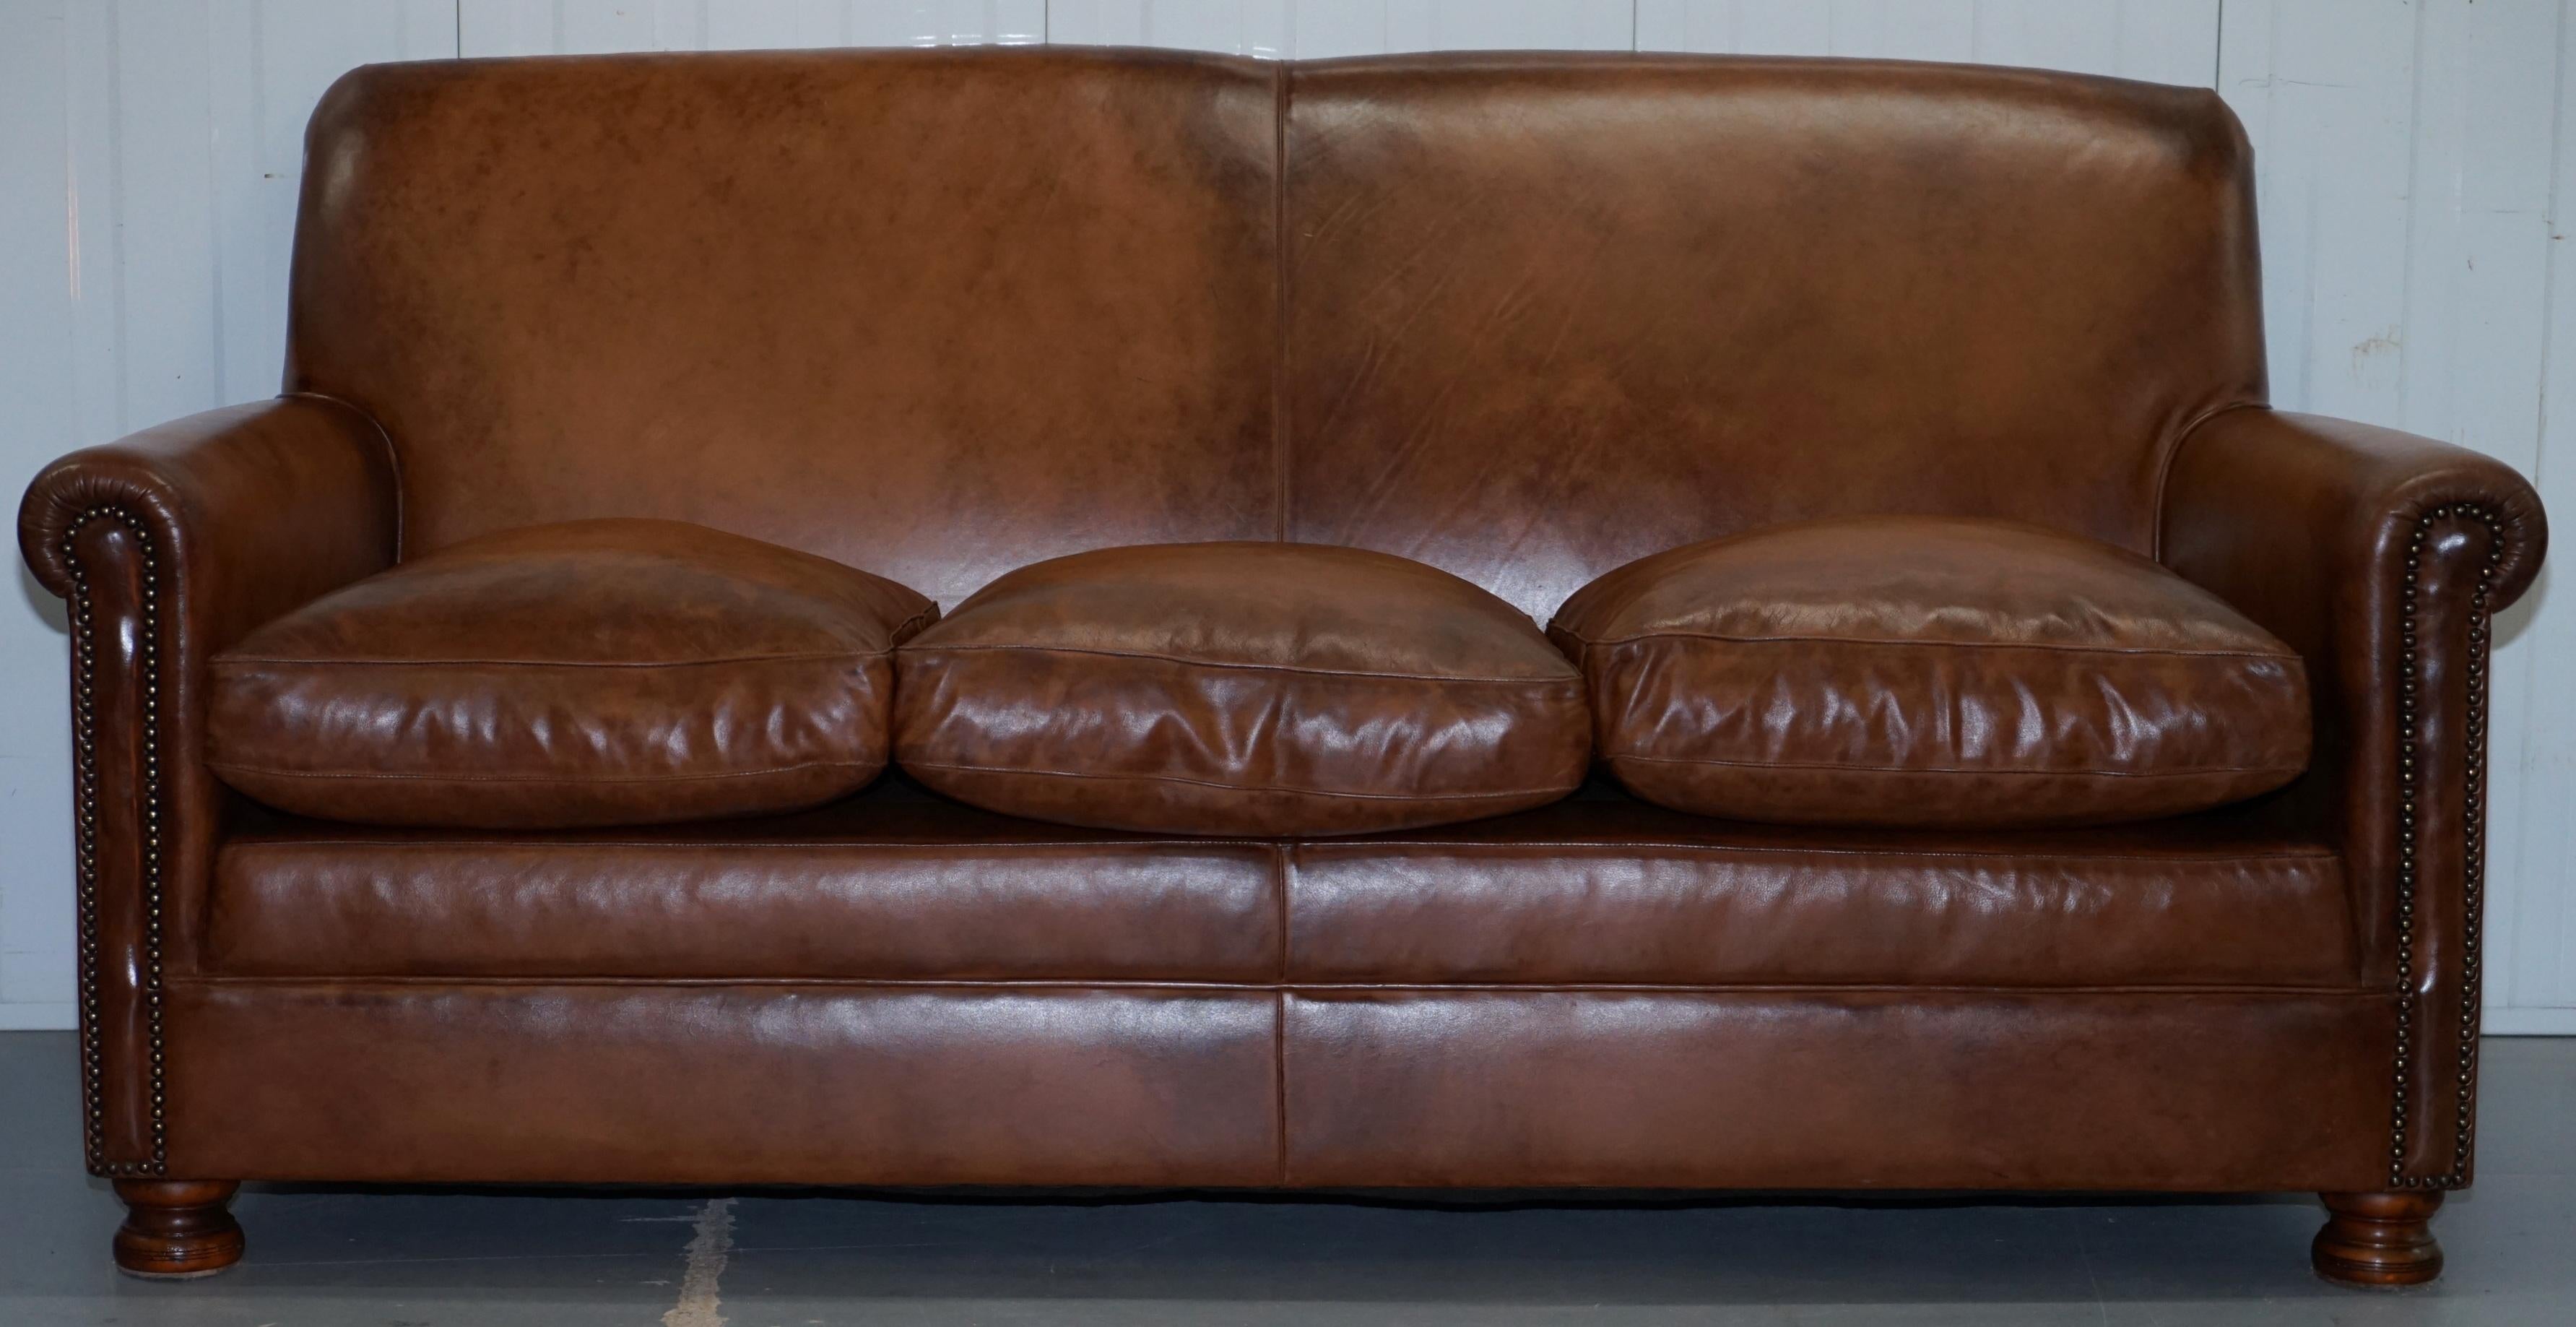 We are delighted to offer for sale this RRP £3250 handmade in England Tetrad price brown leather three-seat sofa with feather filled cushions

The sofa has medium filled feather cushions so its very comfortable, the leather finish is antiqued and